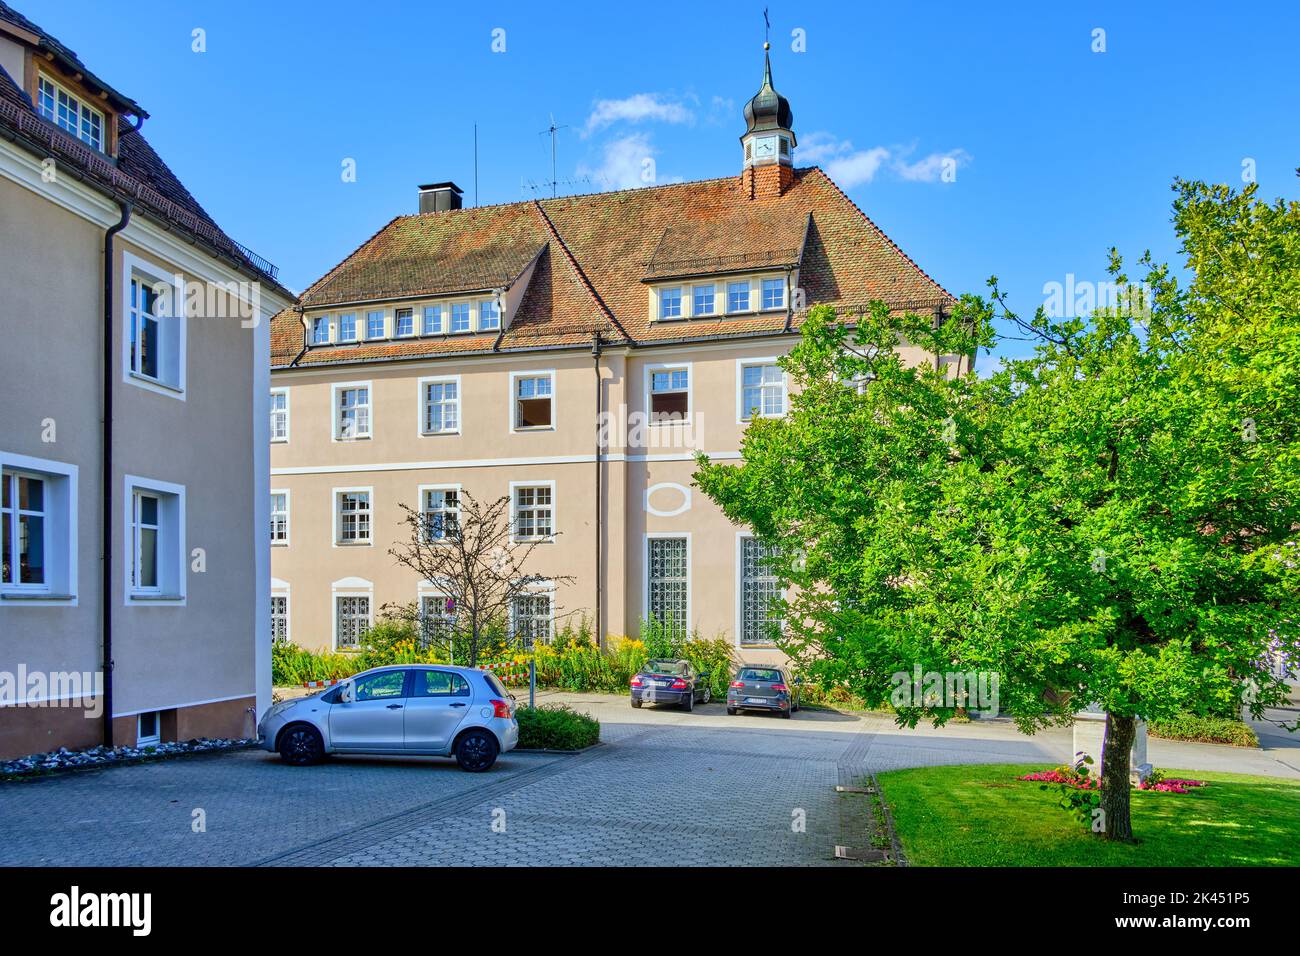 Beuron, Baden-Württemberg, Germany, Europe, August 27, 2021: Vehicles park in front of St. Martin's Archabbey of the Beuron Benedictine Monastery. Stock Photo